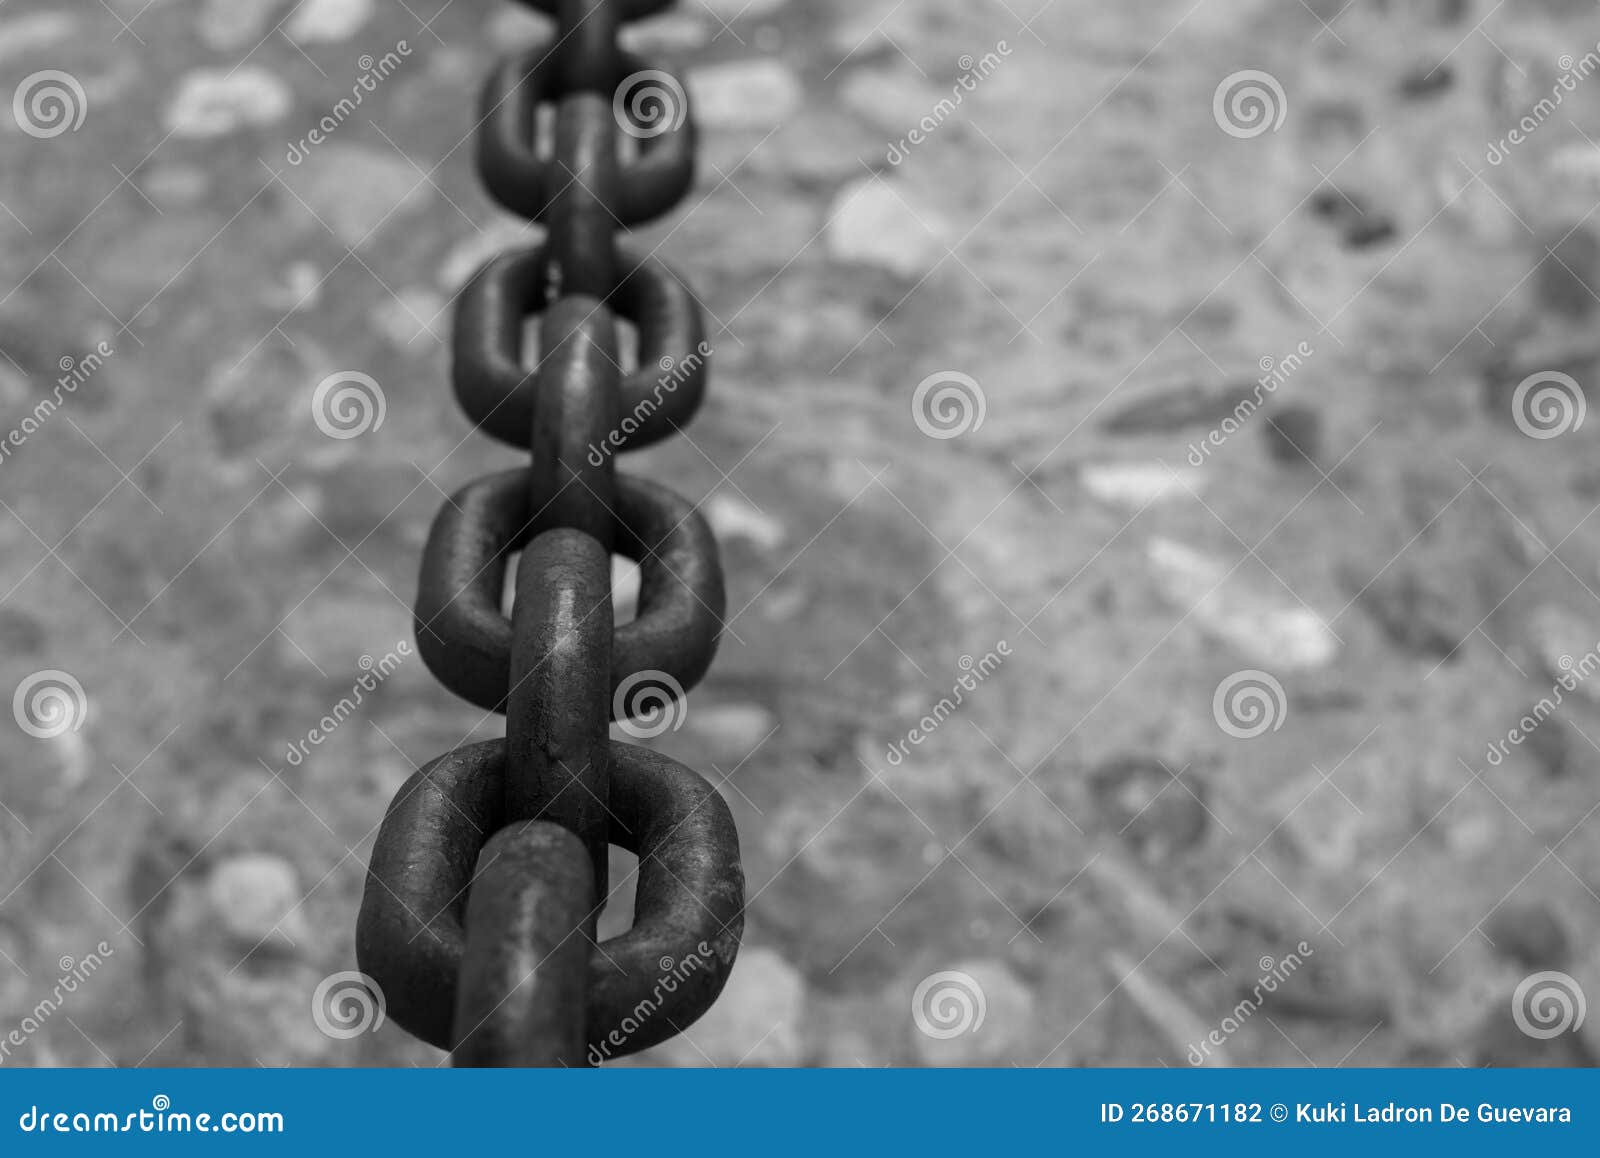 detail of the links of a large chain